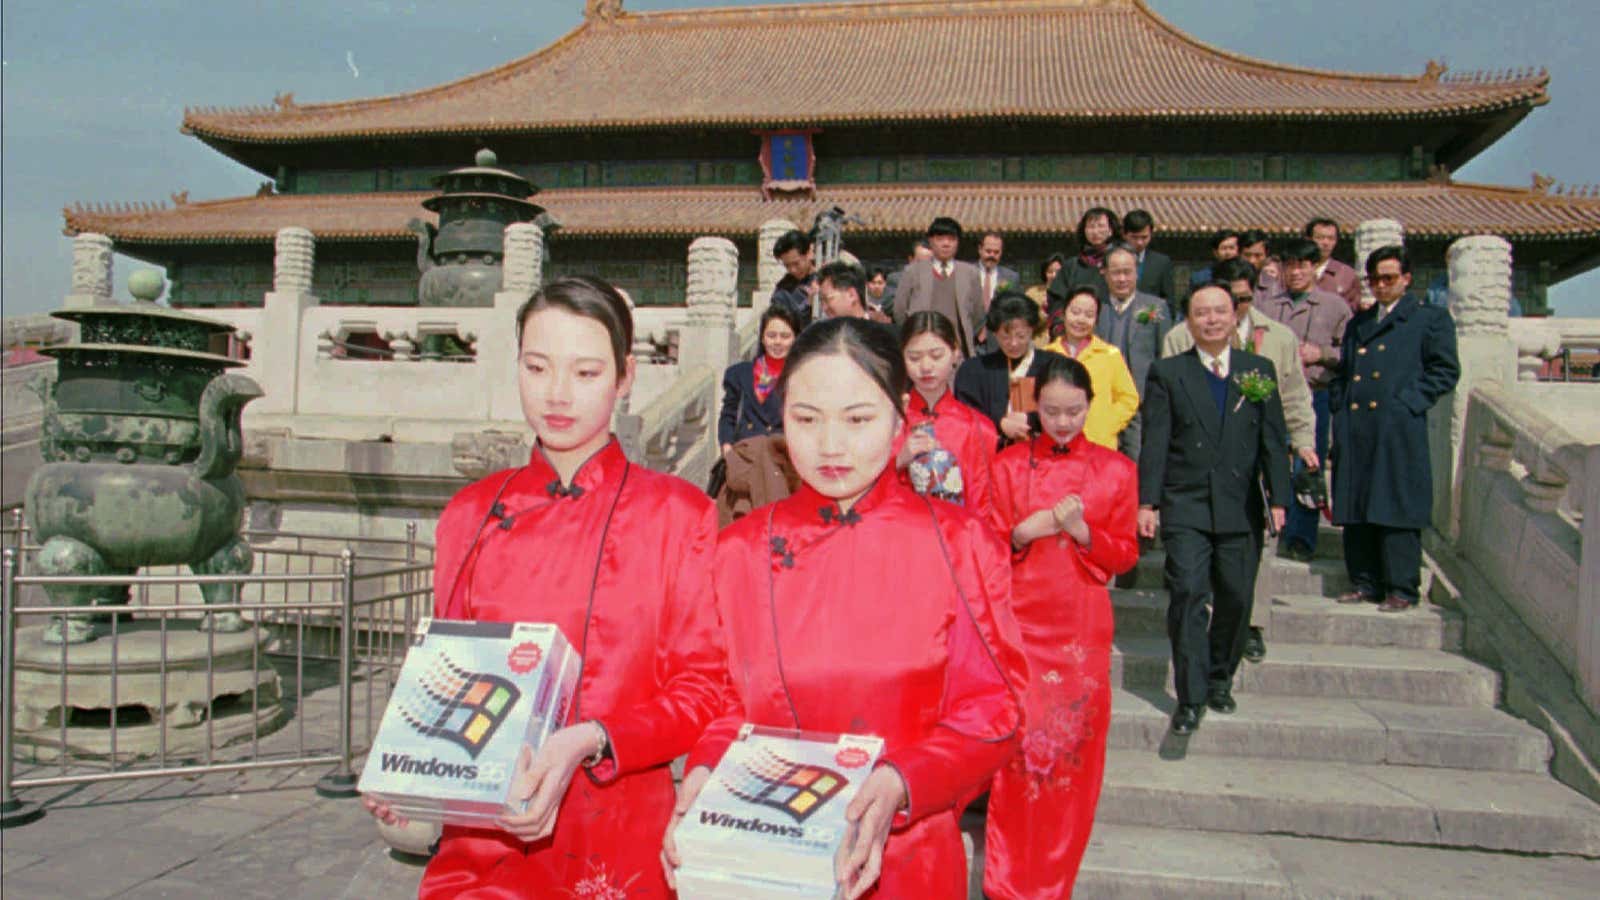 Two women carry boxes of Microsoft Windows 95 through Beijing’s Forbidden City in 1996. The Chinese version of the operating system was officially launched in China in a ceremony in the Forbidden City, the former palace of China’s emperors.